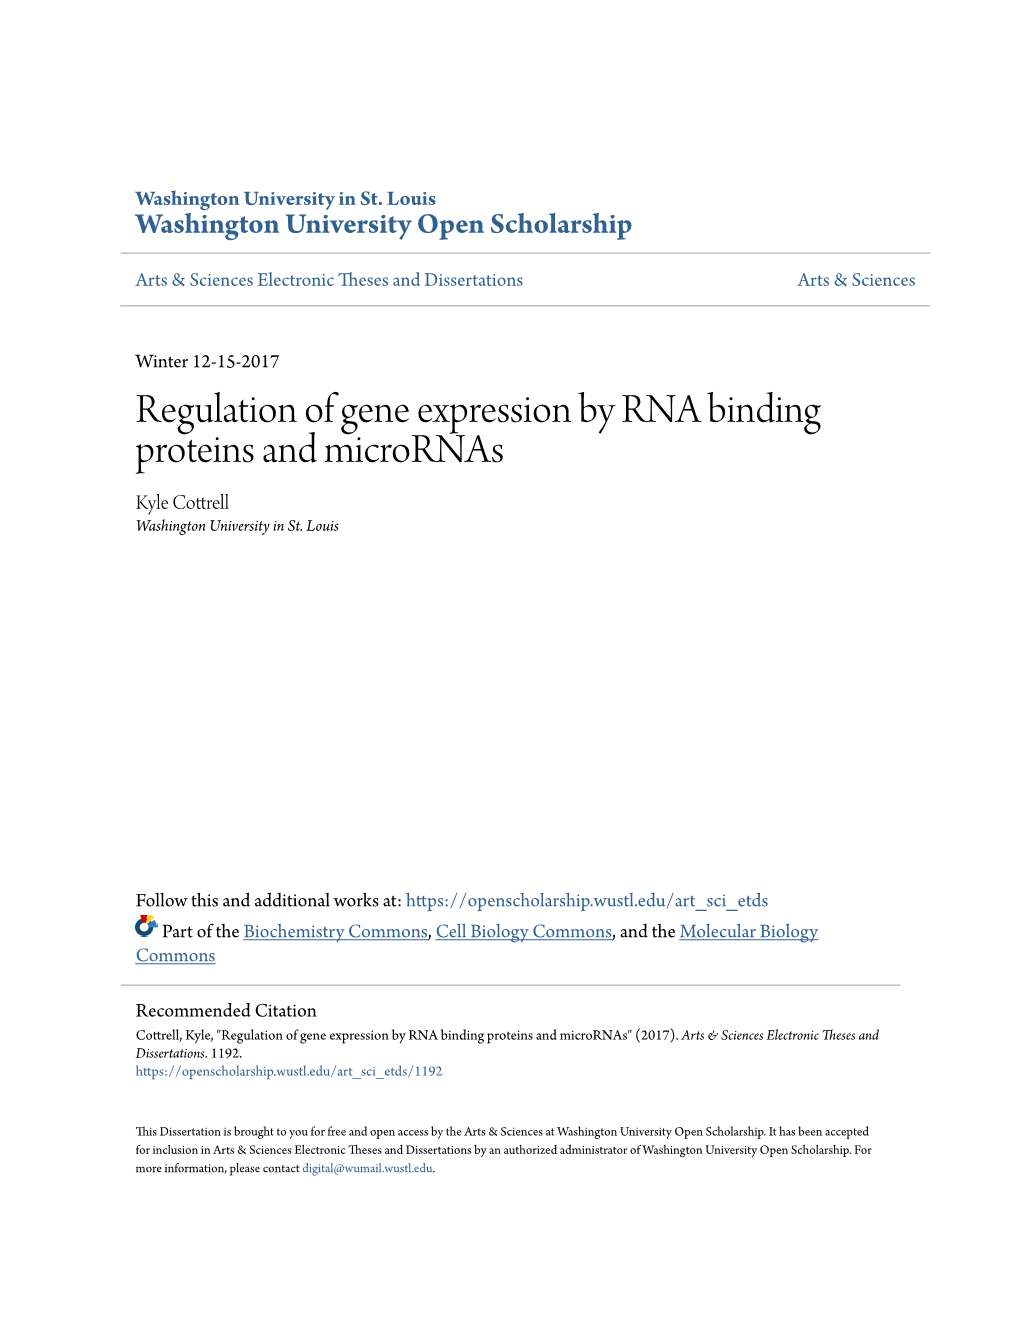 Regulation of Gene Expression by RNA Binding Proteins and Micrornas Kyle Cottrell Washington University in St